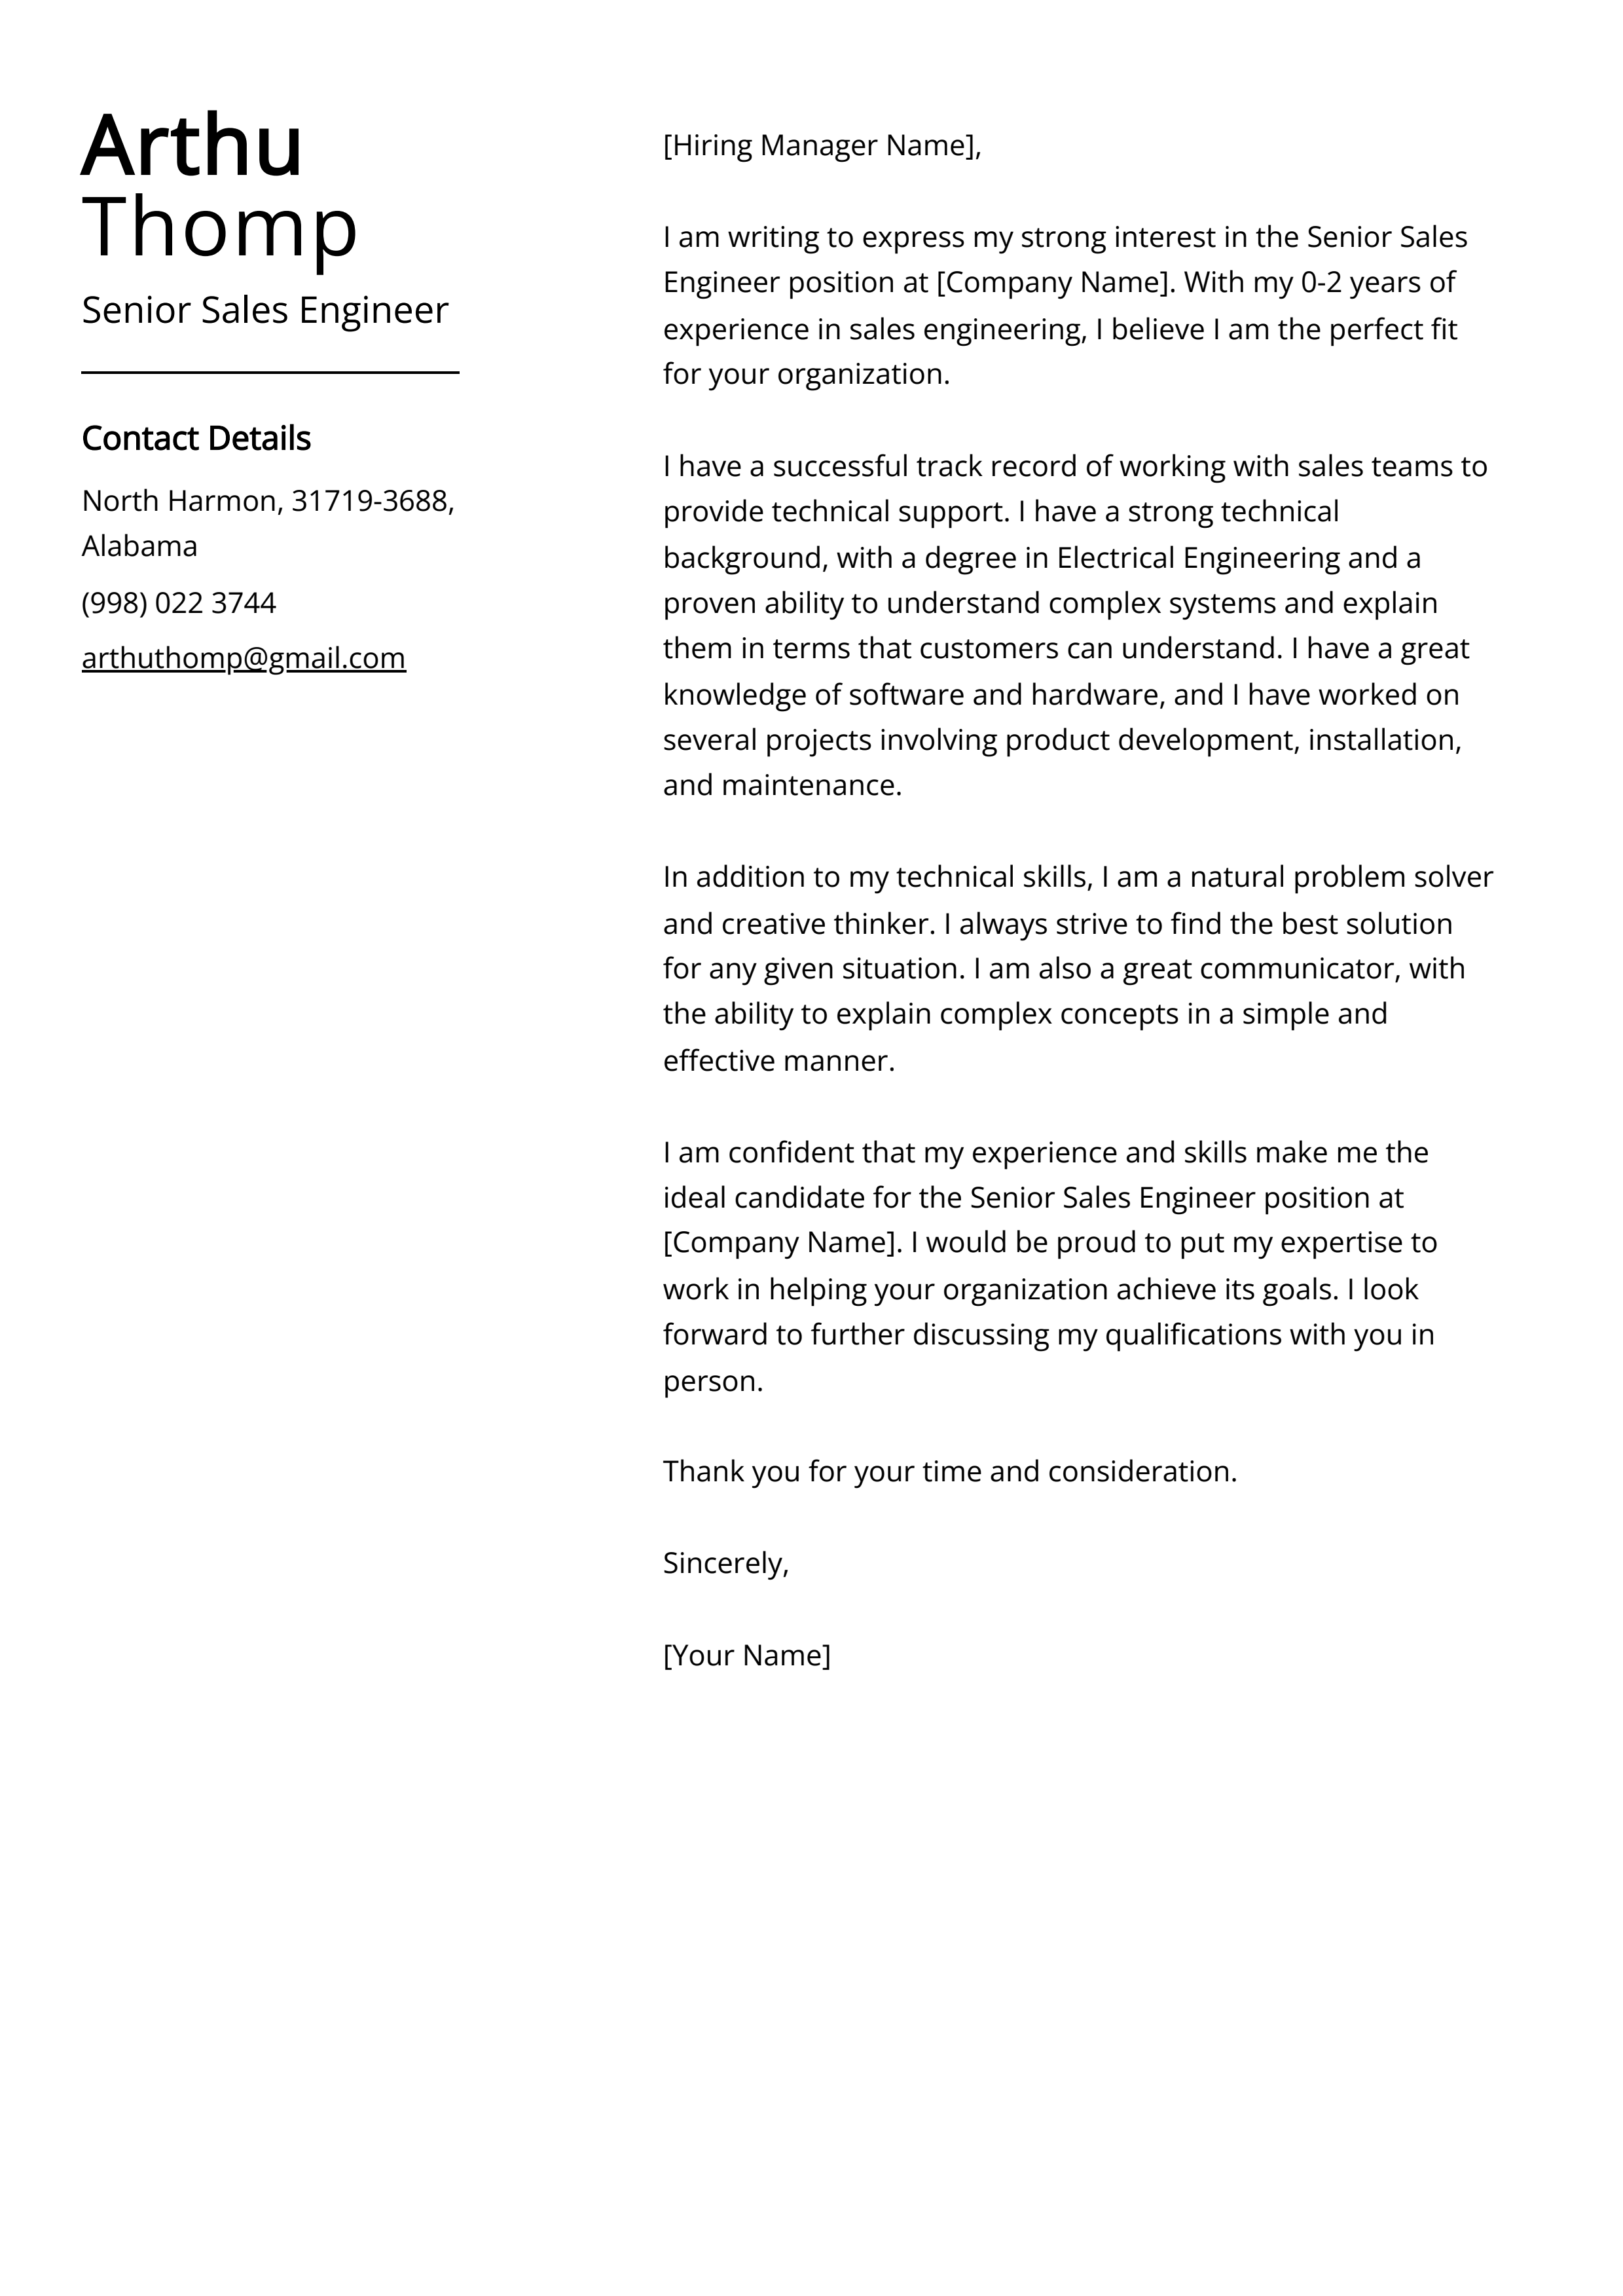 Senior Sales Engineer Cover Letter Example